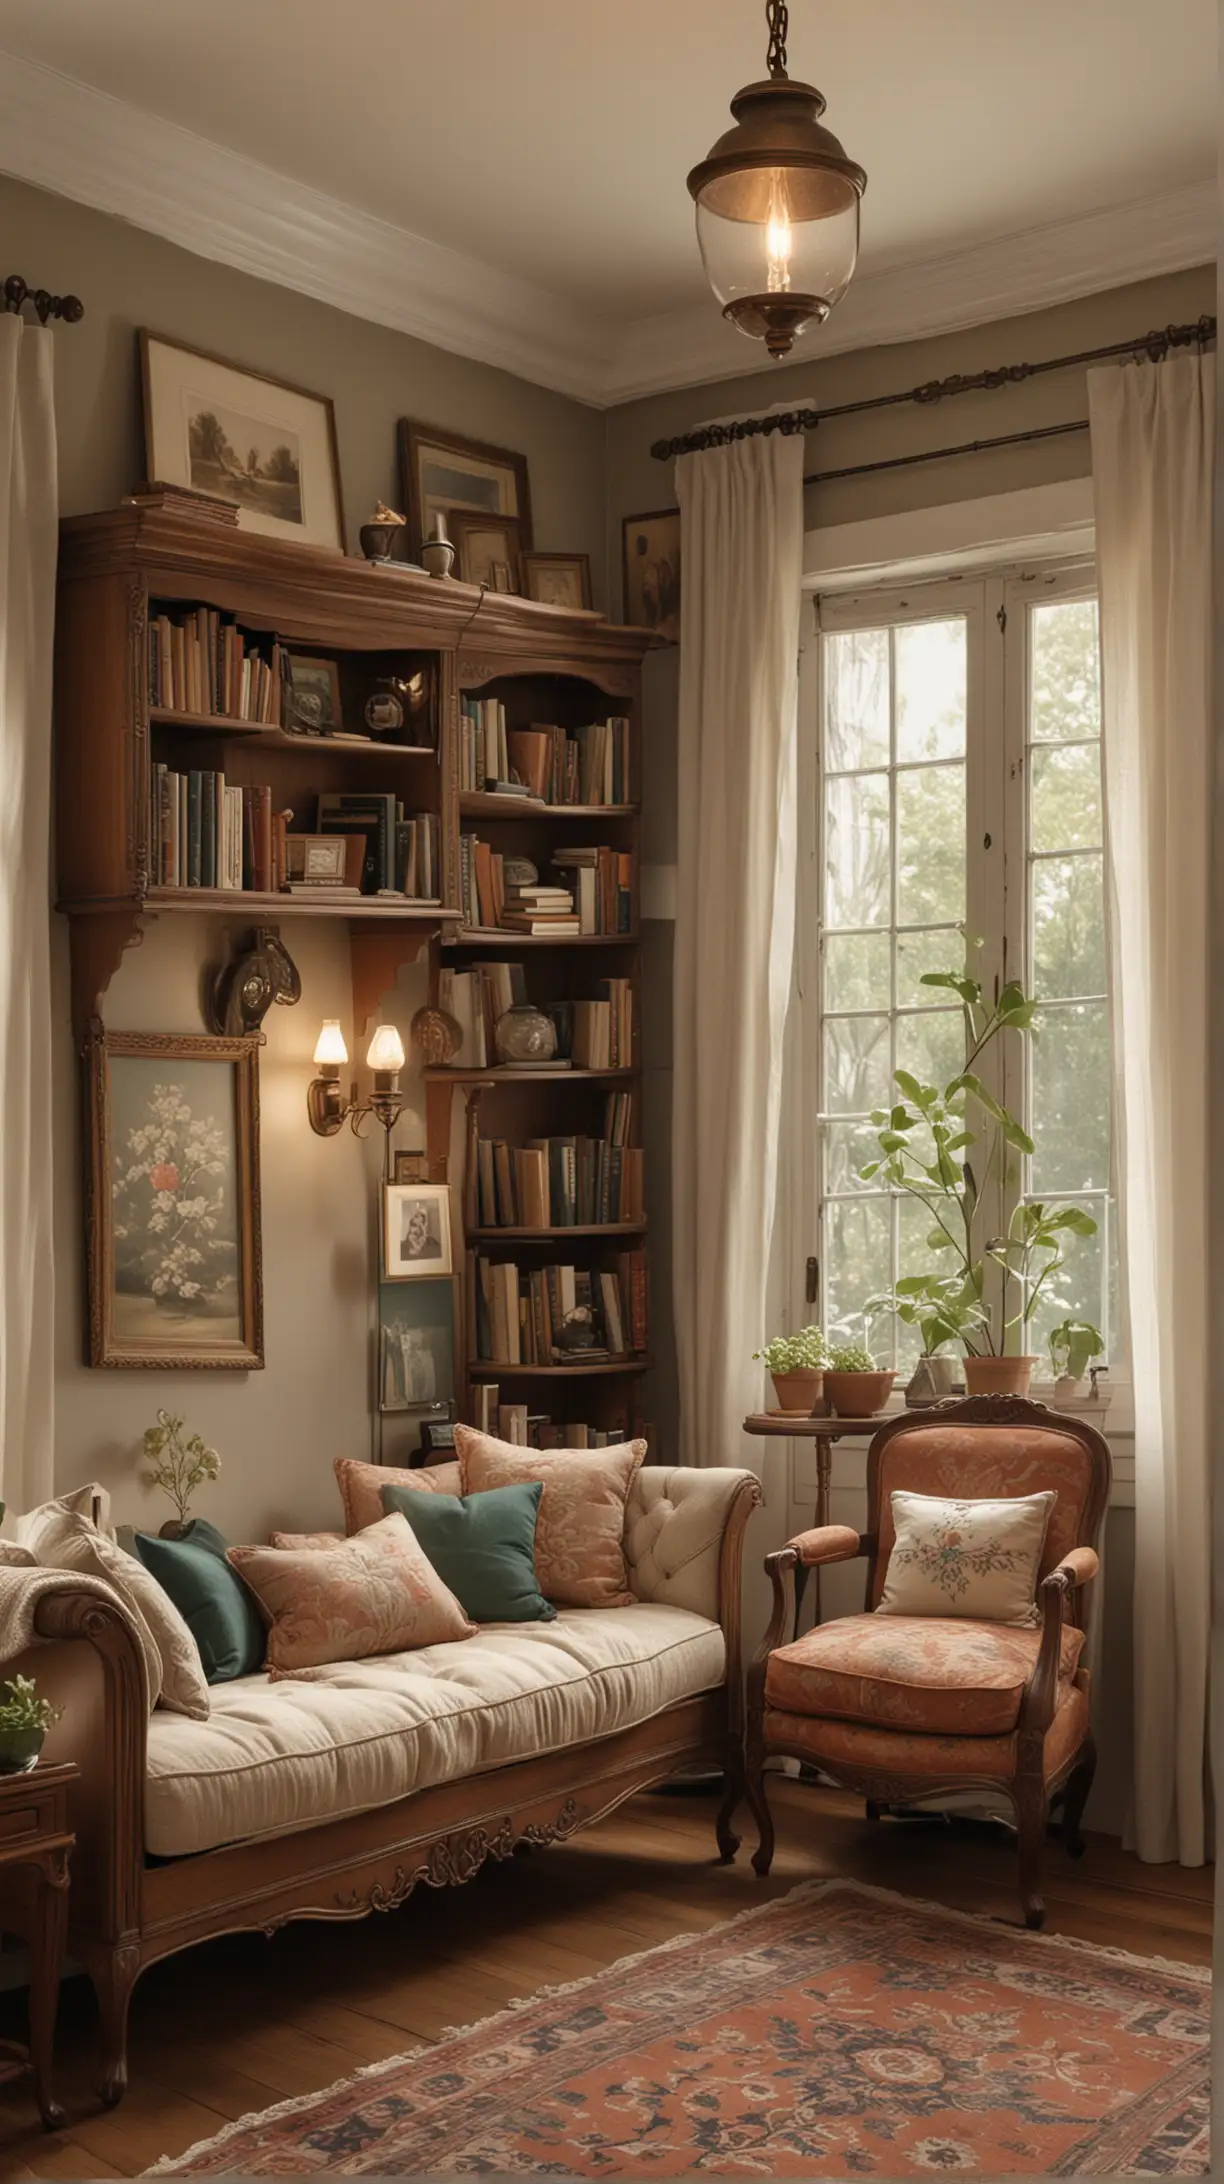 Create picture for Cozy Reading Nook Ideas and make sure it should be attractive and realistic. Make sure that every single object in the picture should be clear means full overview of the idea not a single object. Here's the idea to create the picture [Vintage Vibe

I love the elegance of old-world charm, so I've decorated my nook with antique furniture. It adds a sense of timelessness and comfort that enhances my reading experience.]